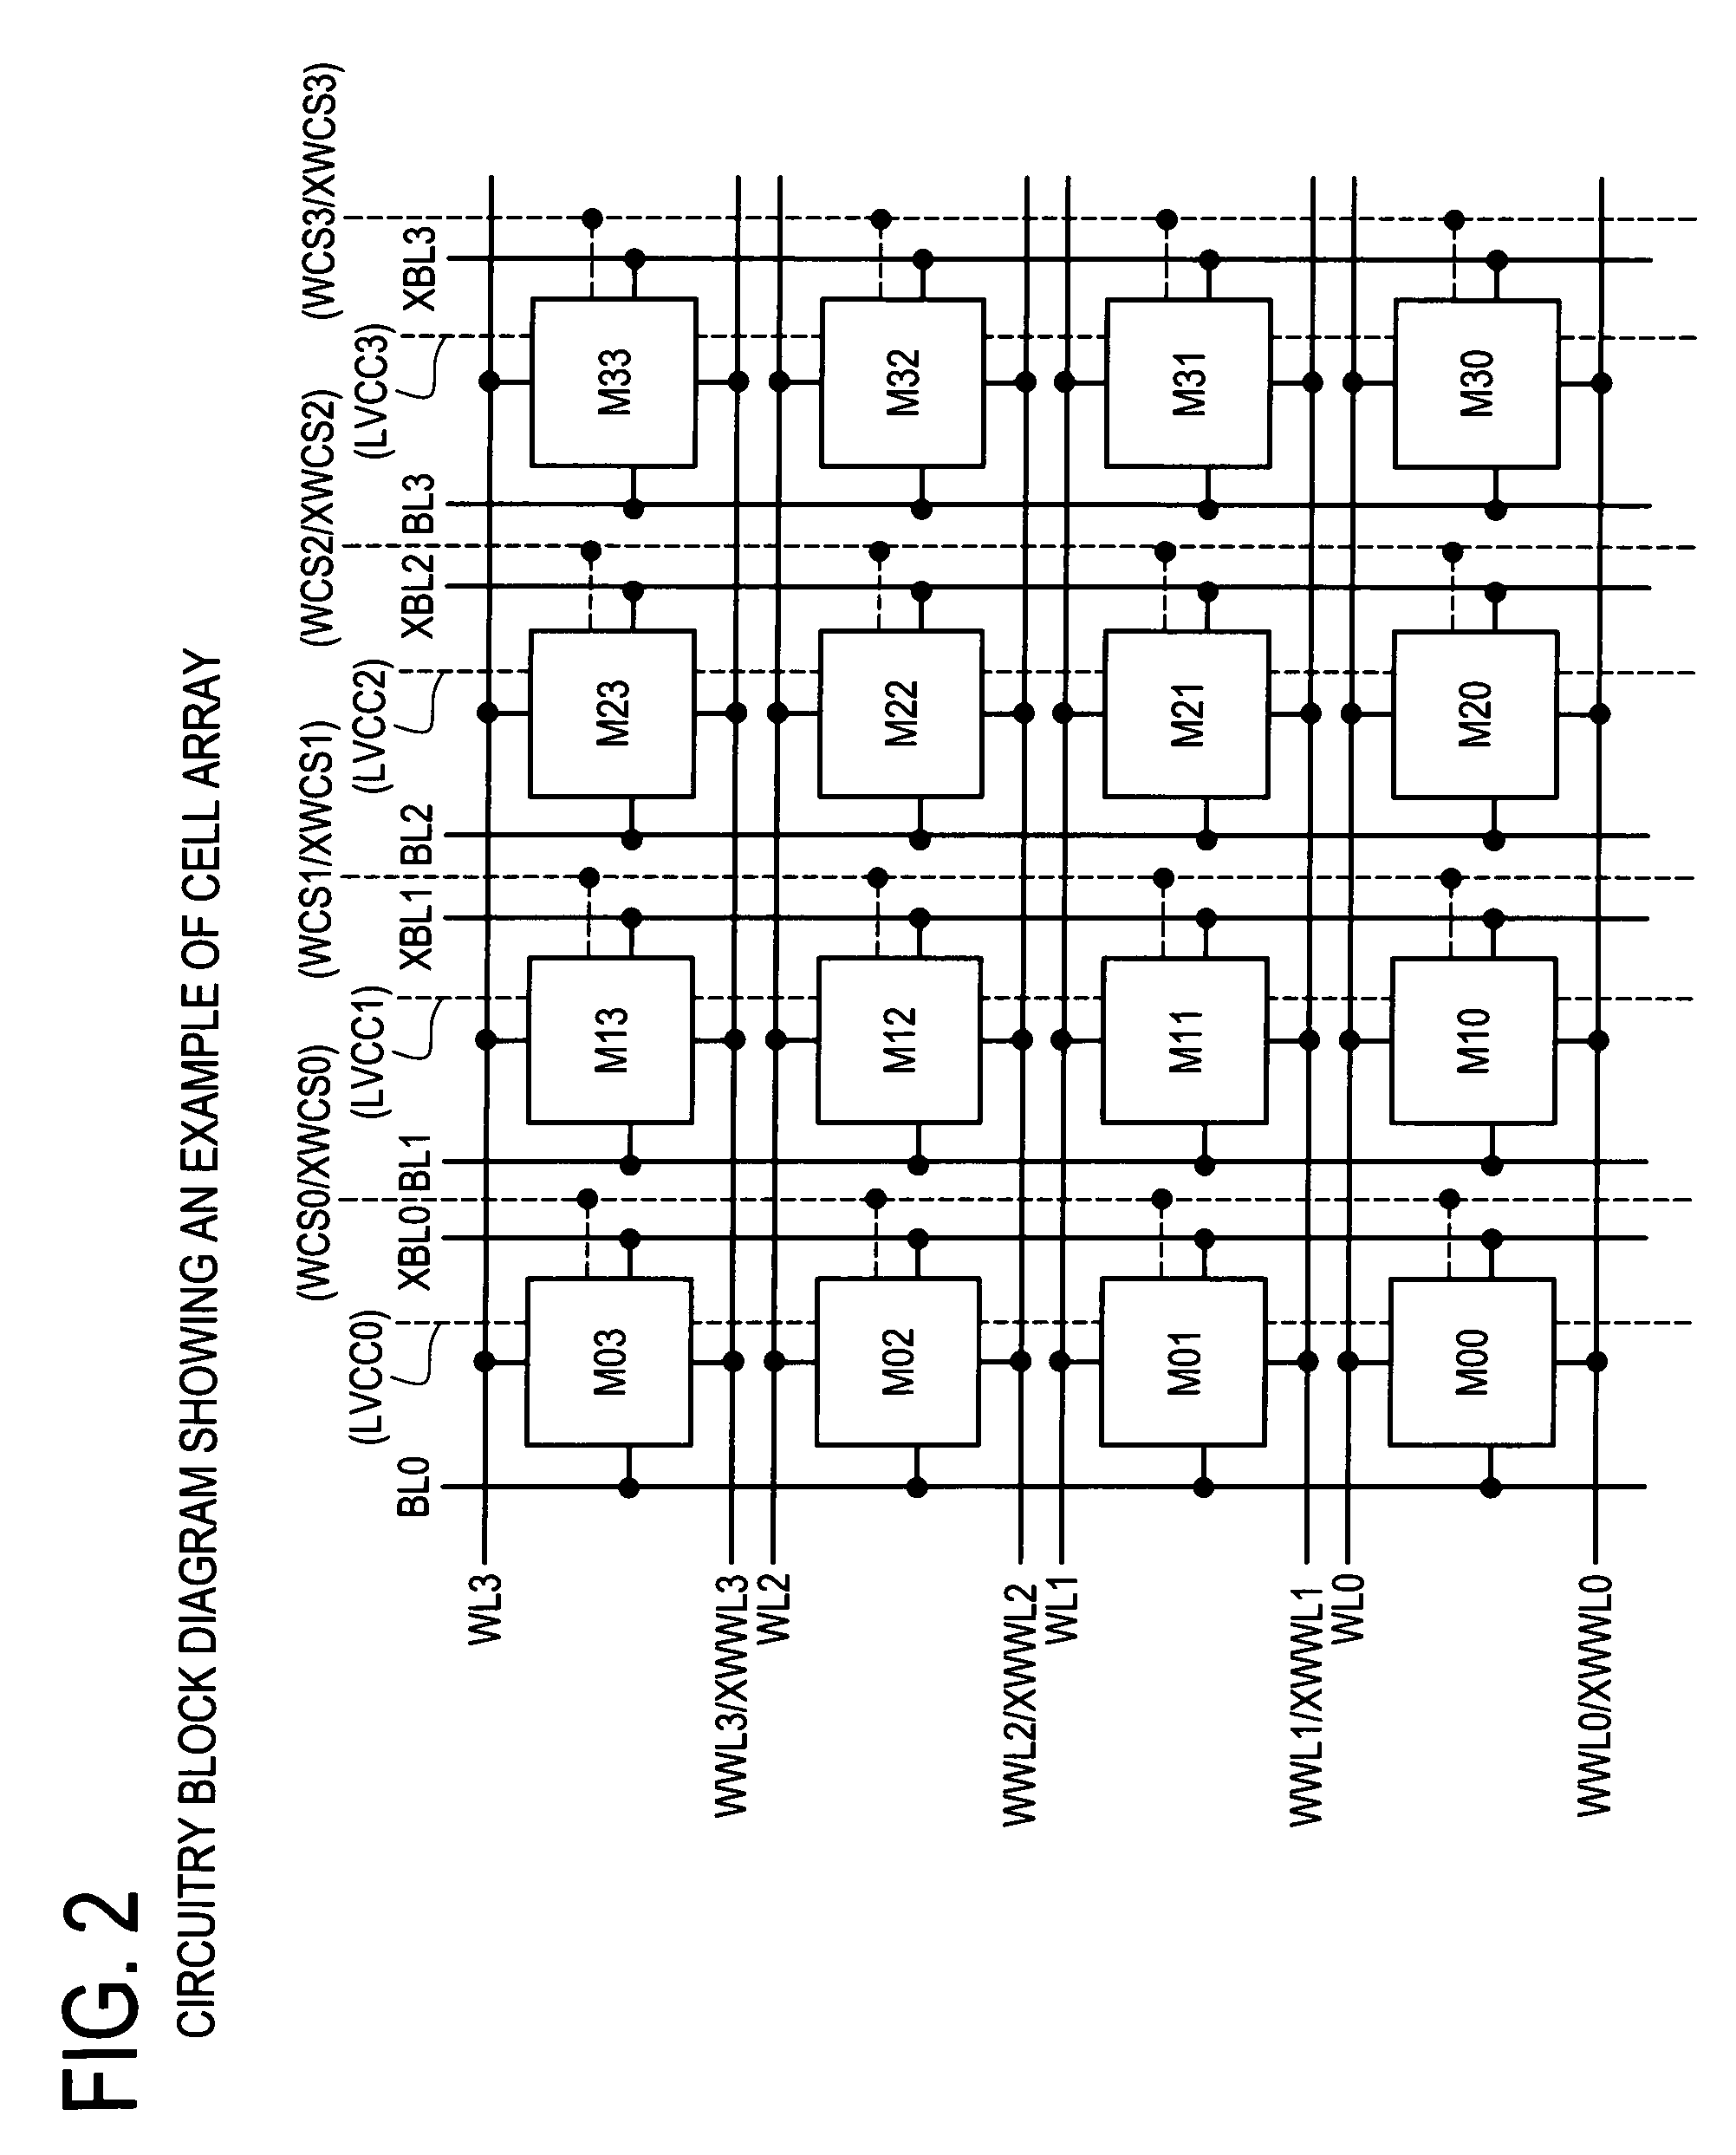 Semiconductor memory which enables reliable data writing with low supply voltage by improving the conductance via access transistors during write operation